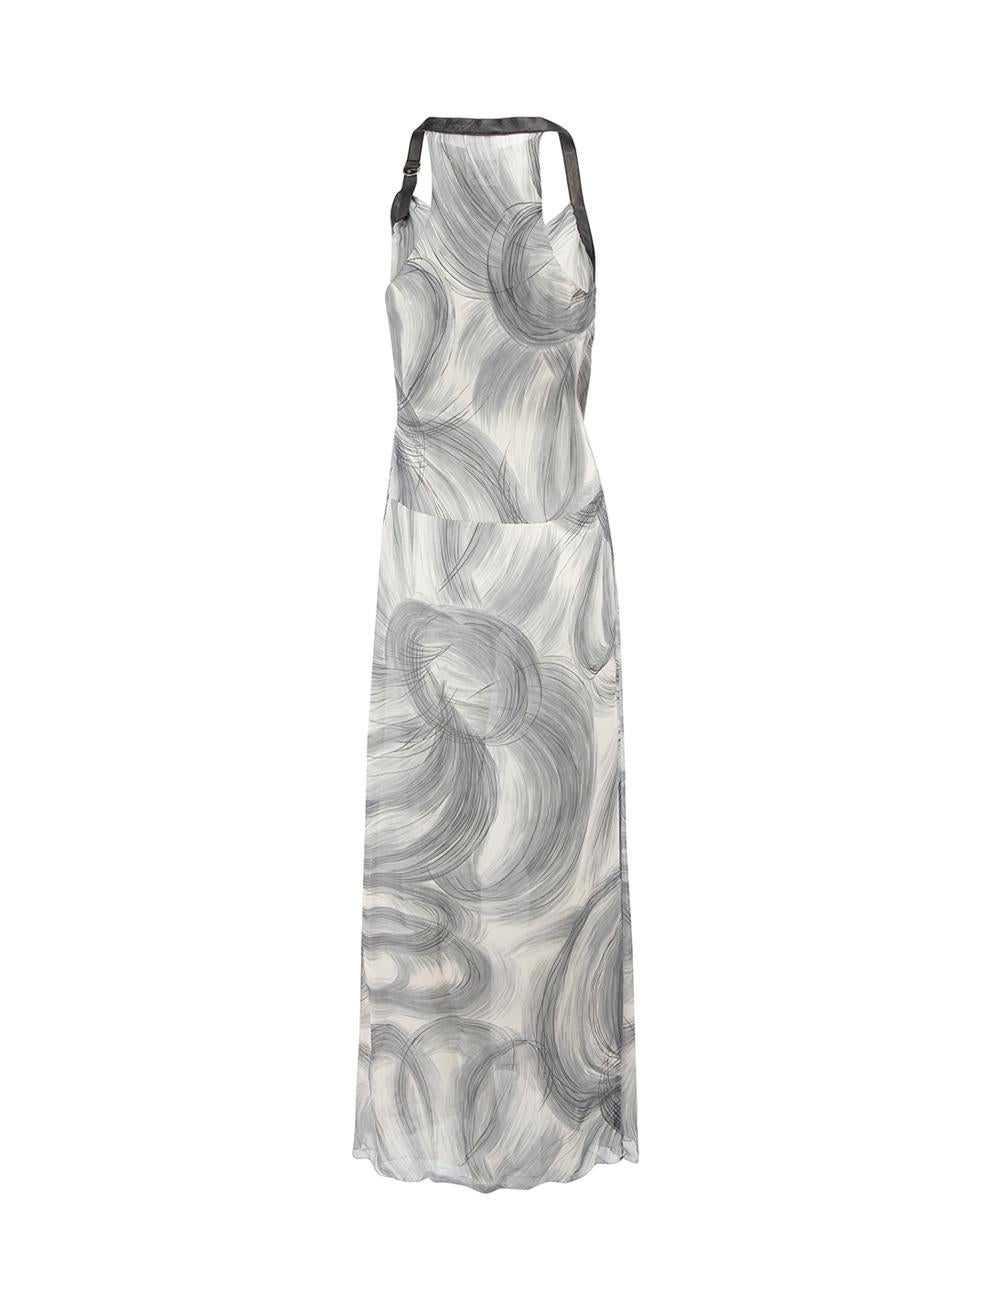 Versus Versace Grey Silk Abstract Maxi Dress Size M In Good Condition For Sale In London, GB